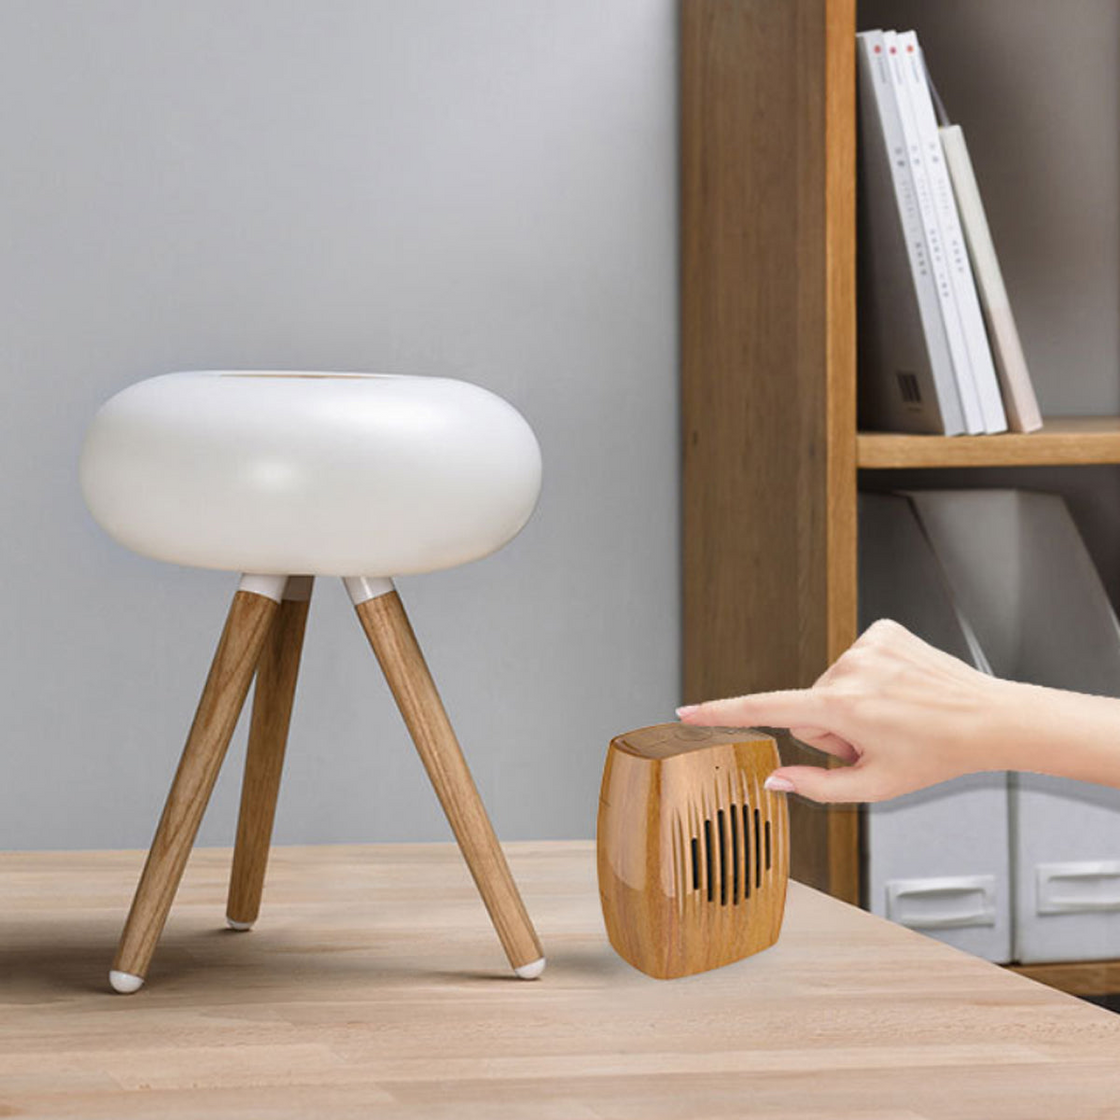 Wood Look Retro Bluetooth Speaker - Classic Home and Office Addition